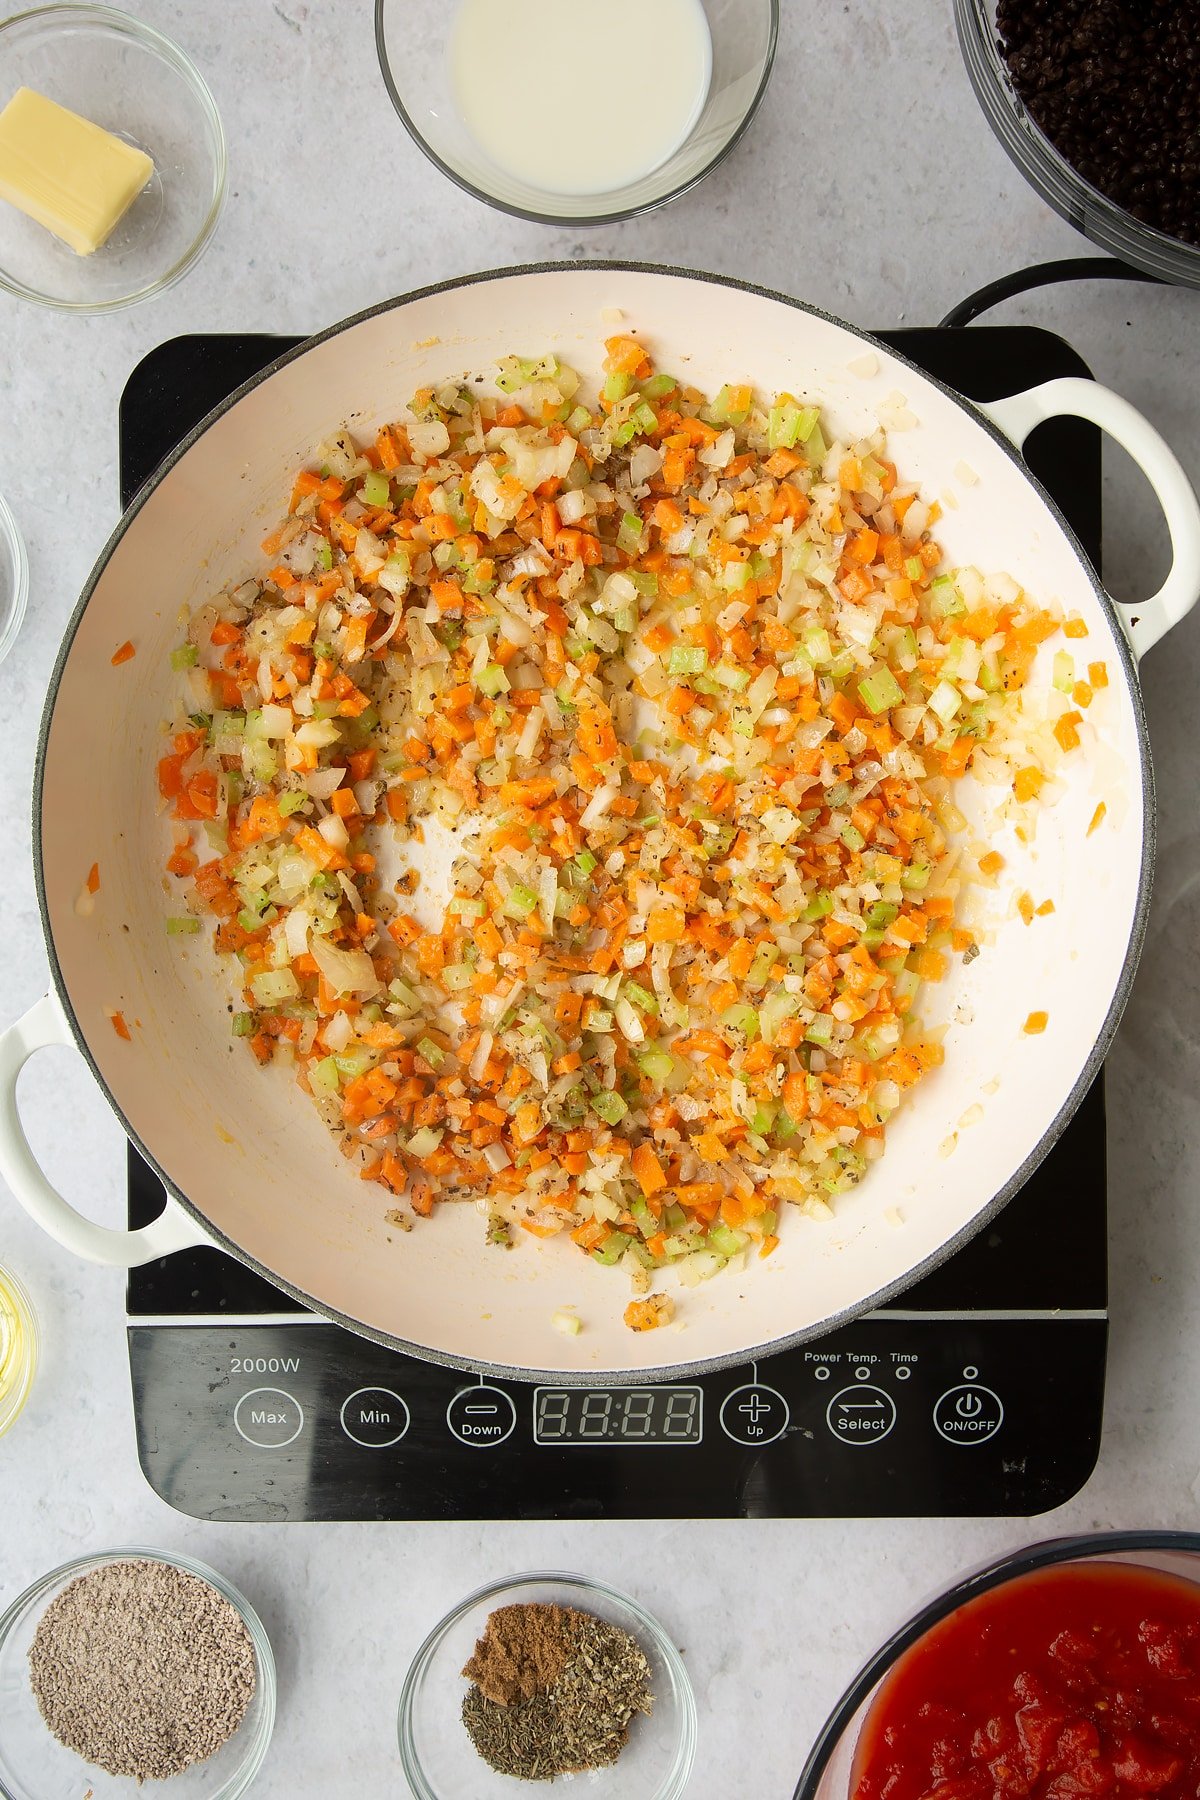 a large frying pan on an induction hob with chopped onion, celery, carrot, garlic with added herbs.